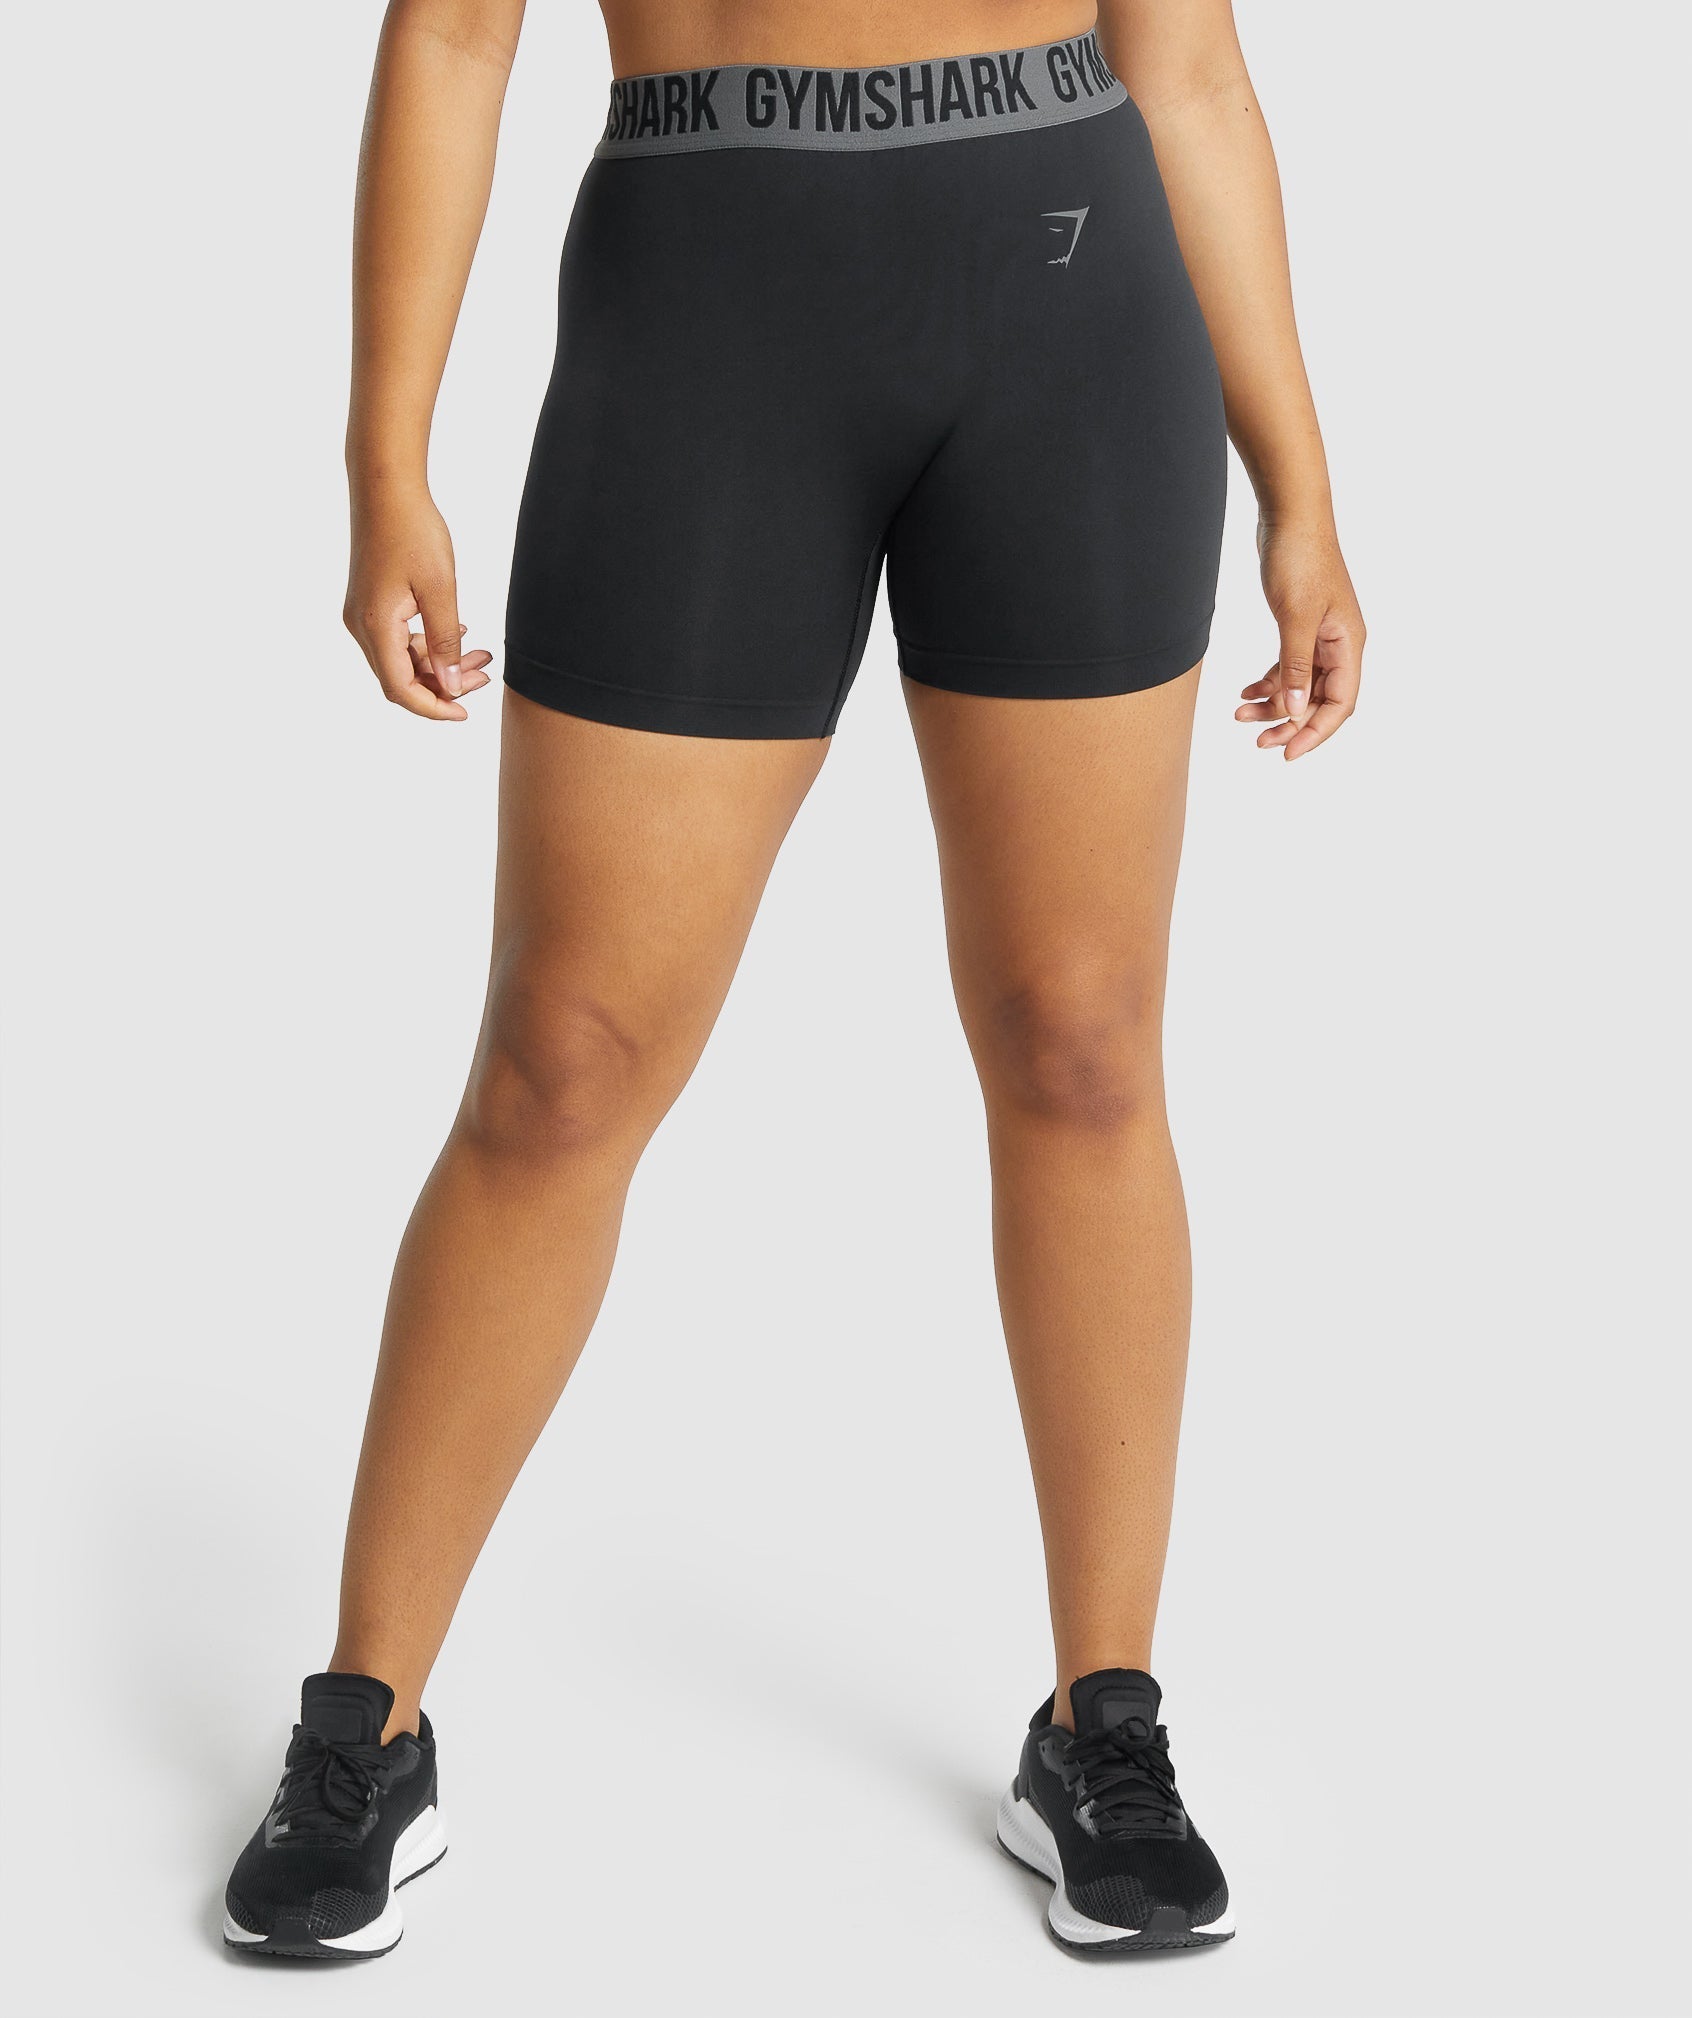 Gymshark Fit Seamless Shorts - Black – Client 446 100K products